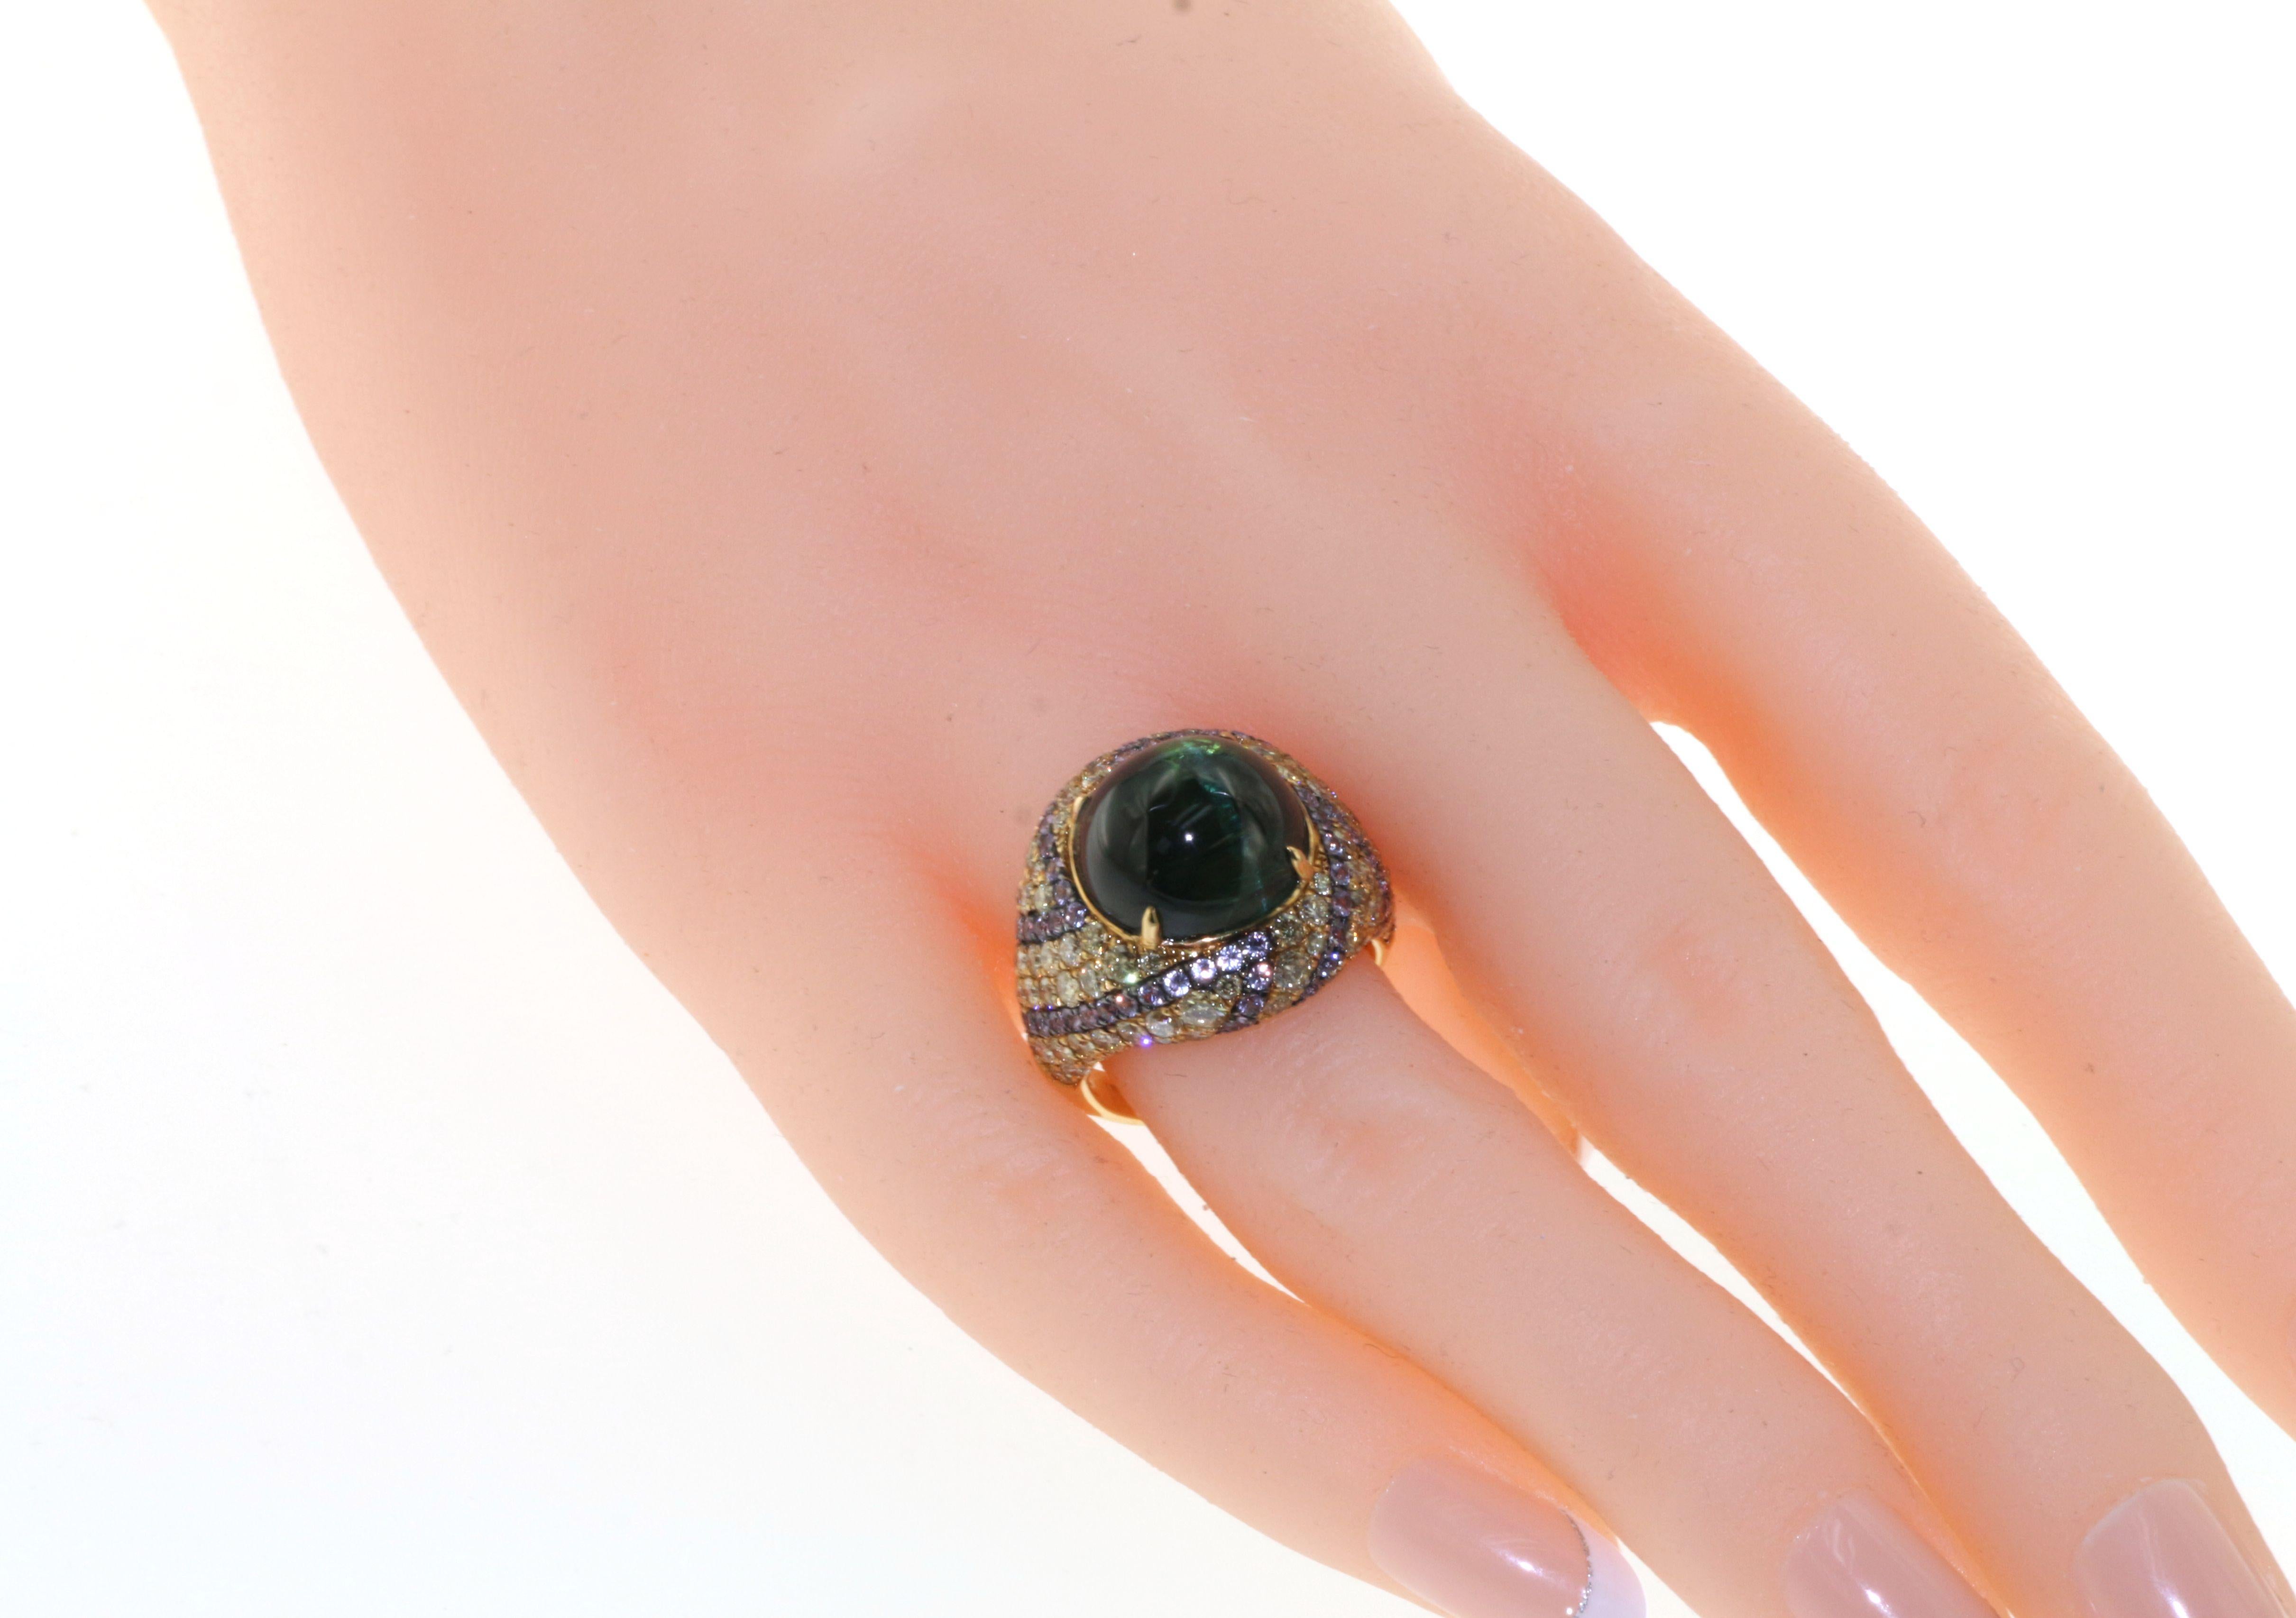 Indulge in the luxury of our Cabochon Cat Eye Green Tourmaline Diamond Sapphire Cocktail Ring, an exquisite piece that will elevate any outfit. Featuring an impressive 11.20 carat cabochon green tourmaline with a mesmerizing cat's eye effect, this